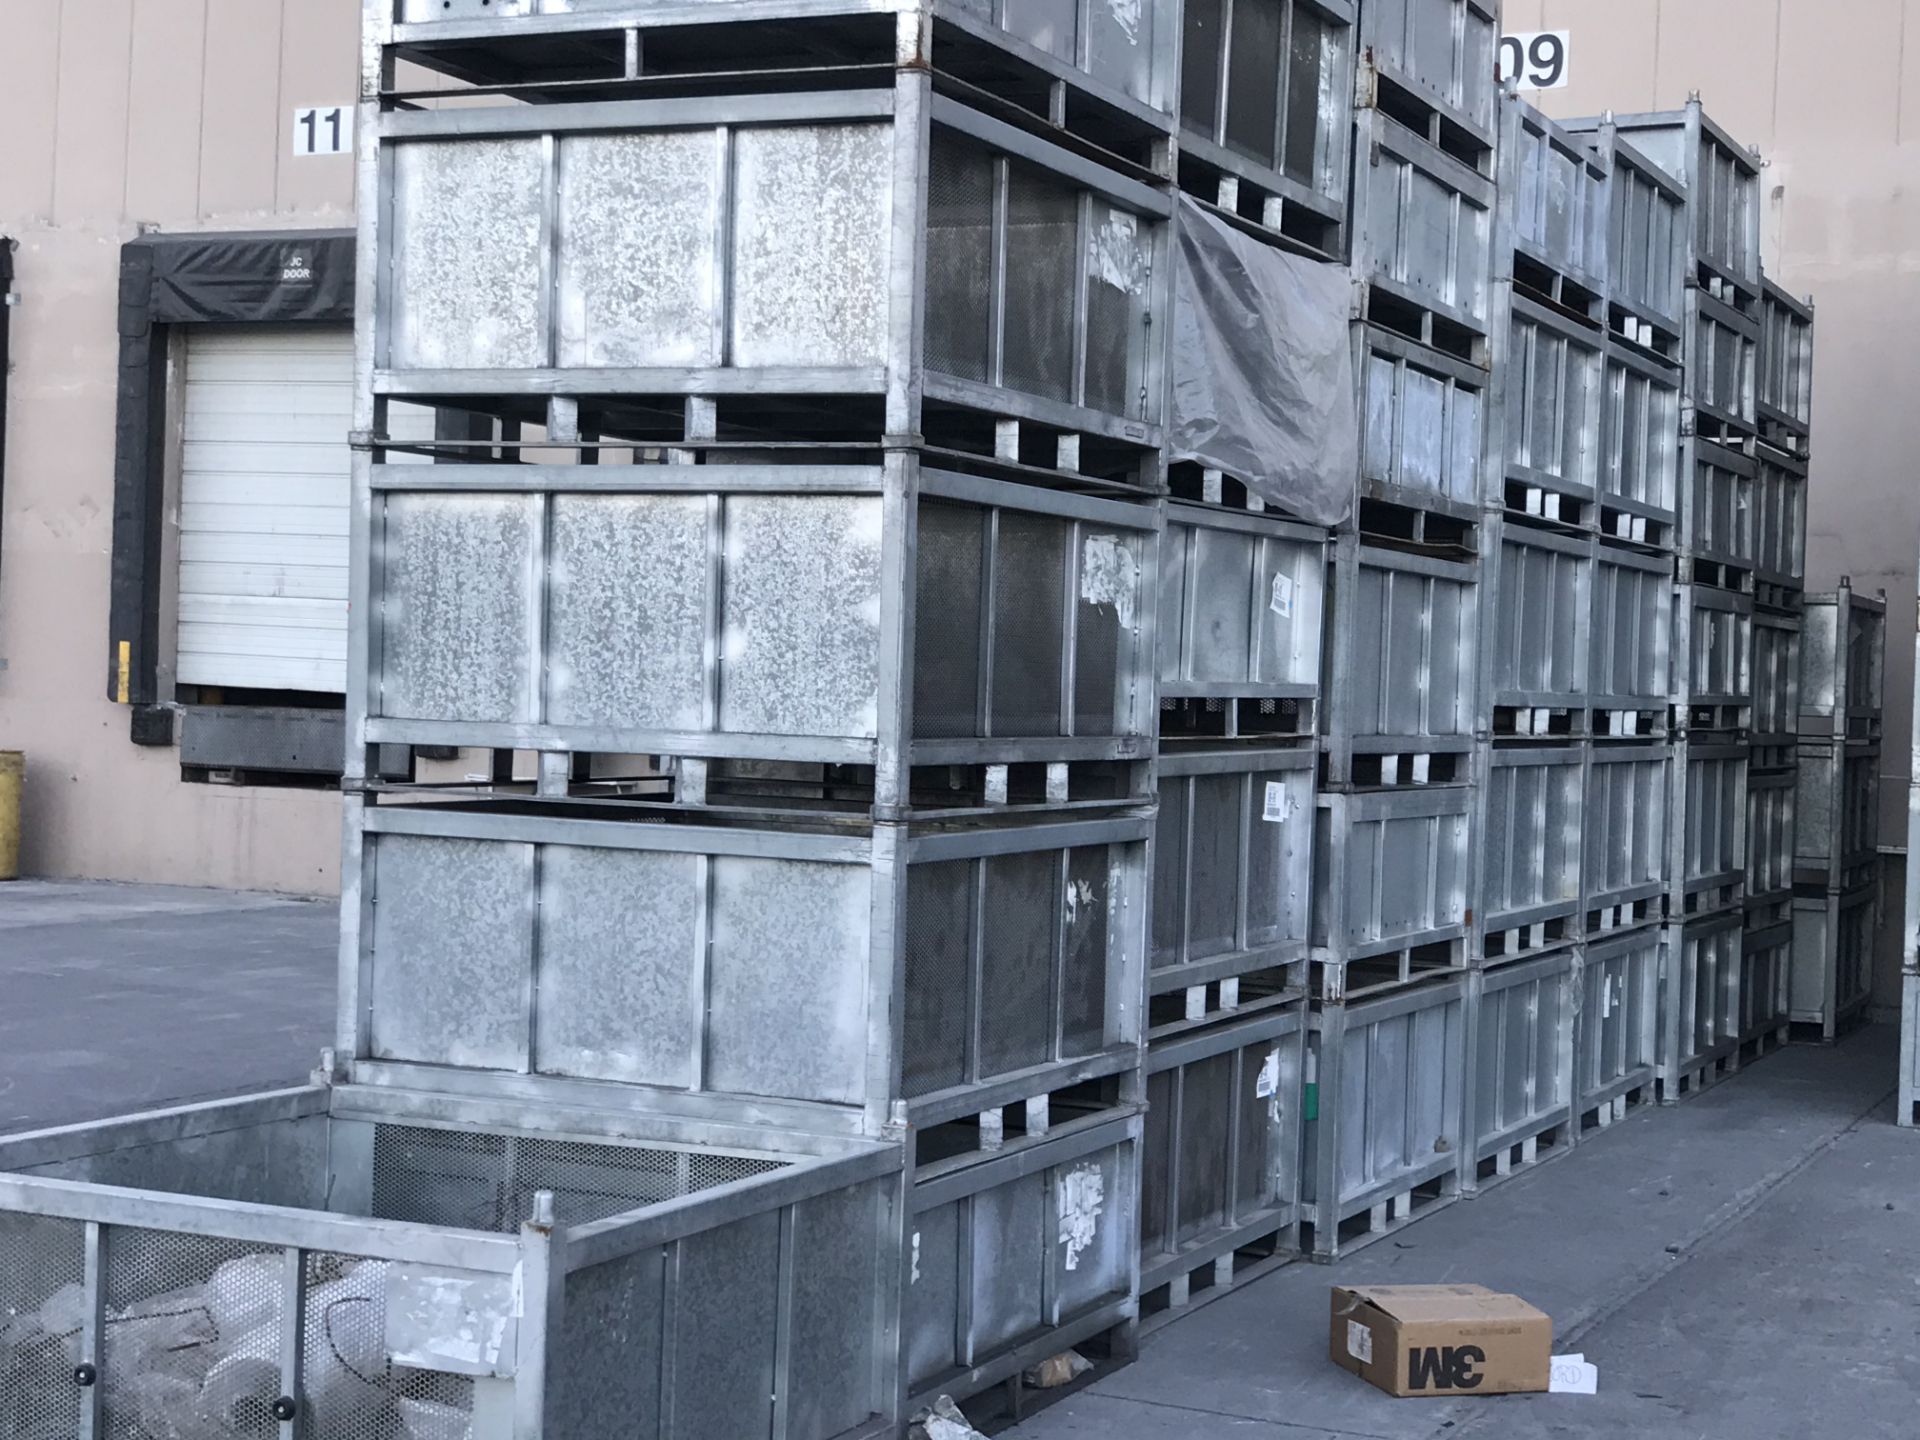 70 GALVANIZED STEEL CONTAINERS XYTEC (DIMENSIONS 0.60x1.32x1.24 METERS) - Image 6 of 8